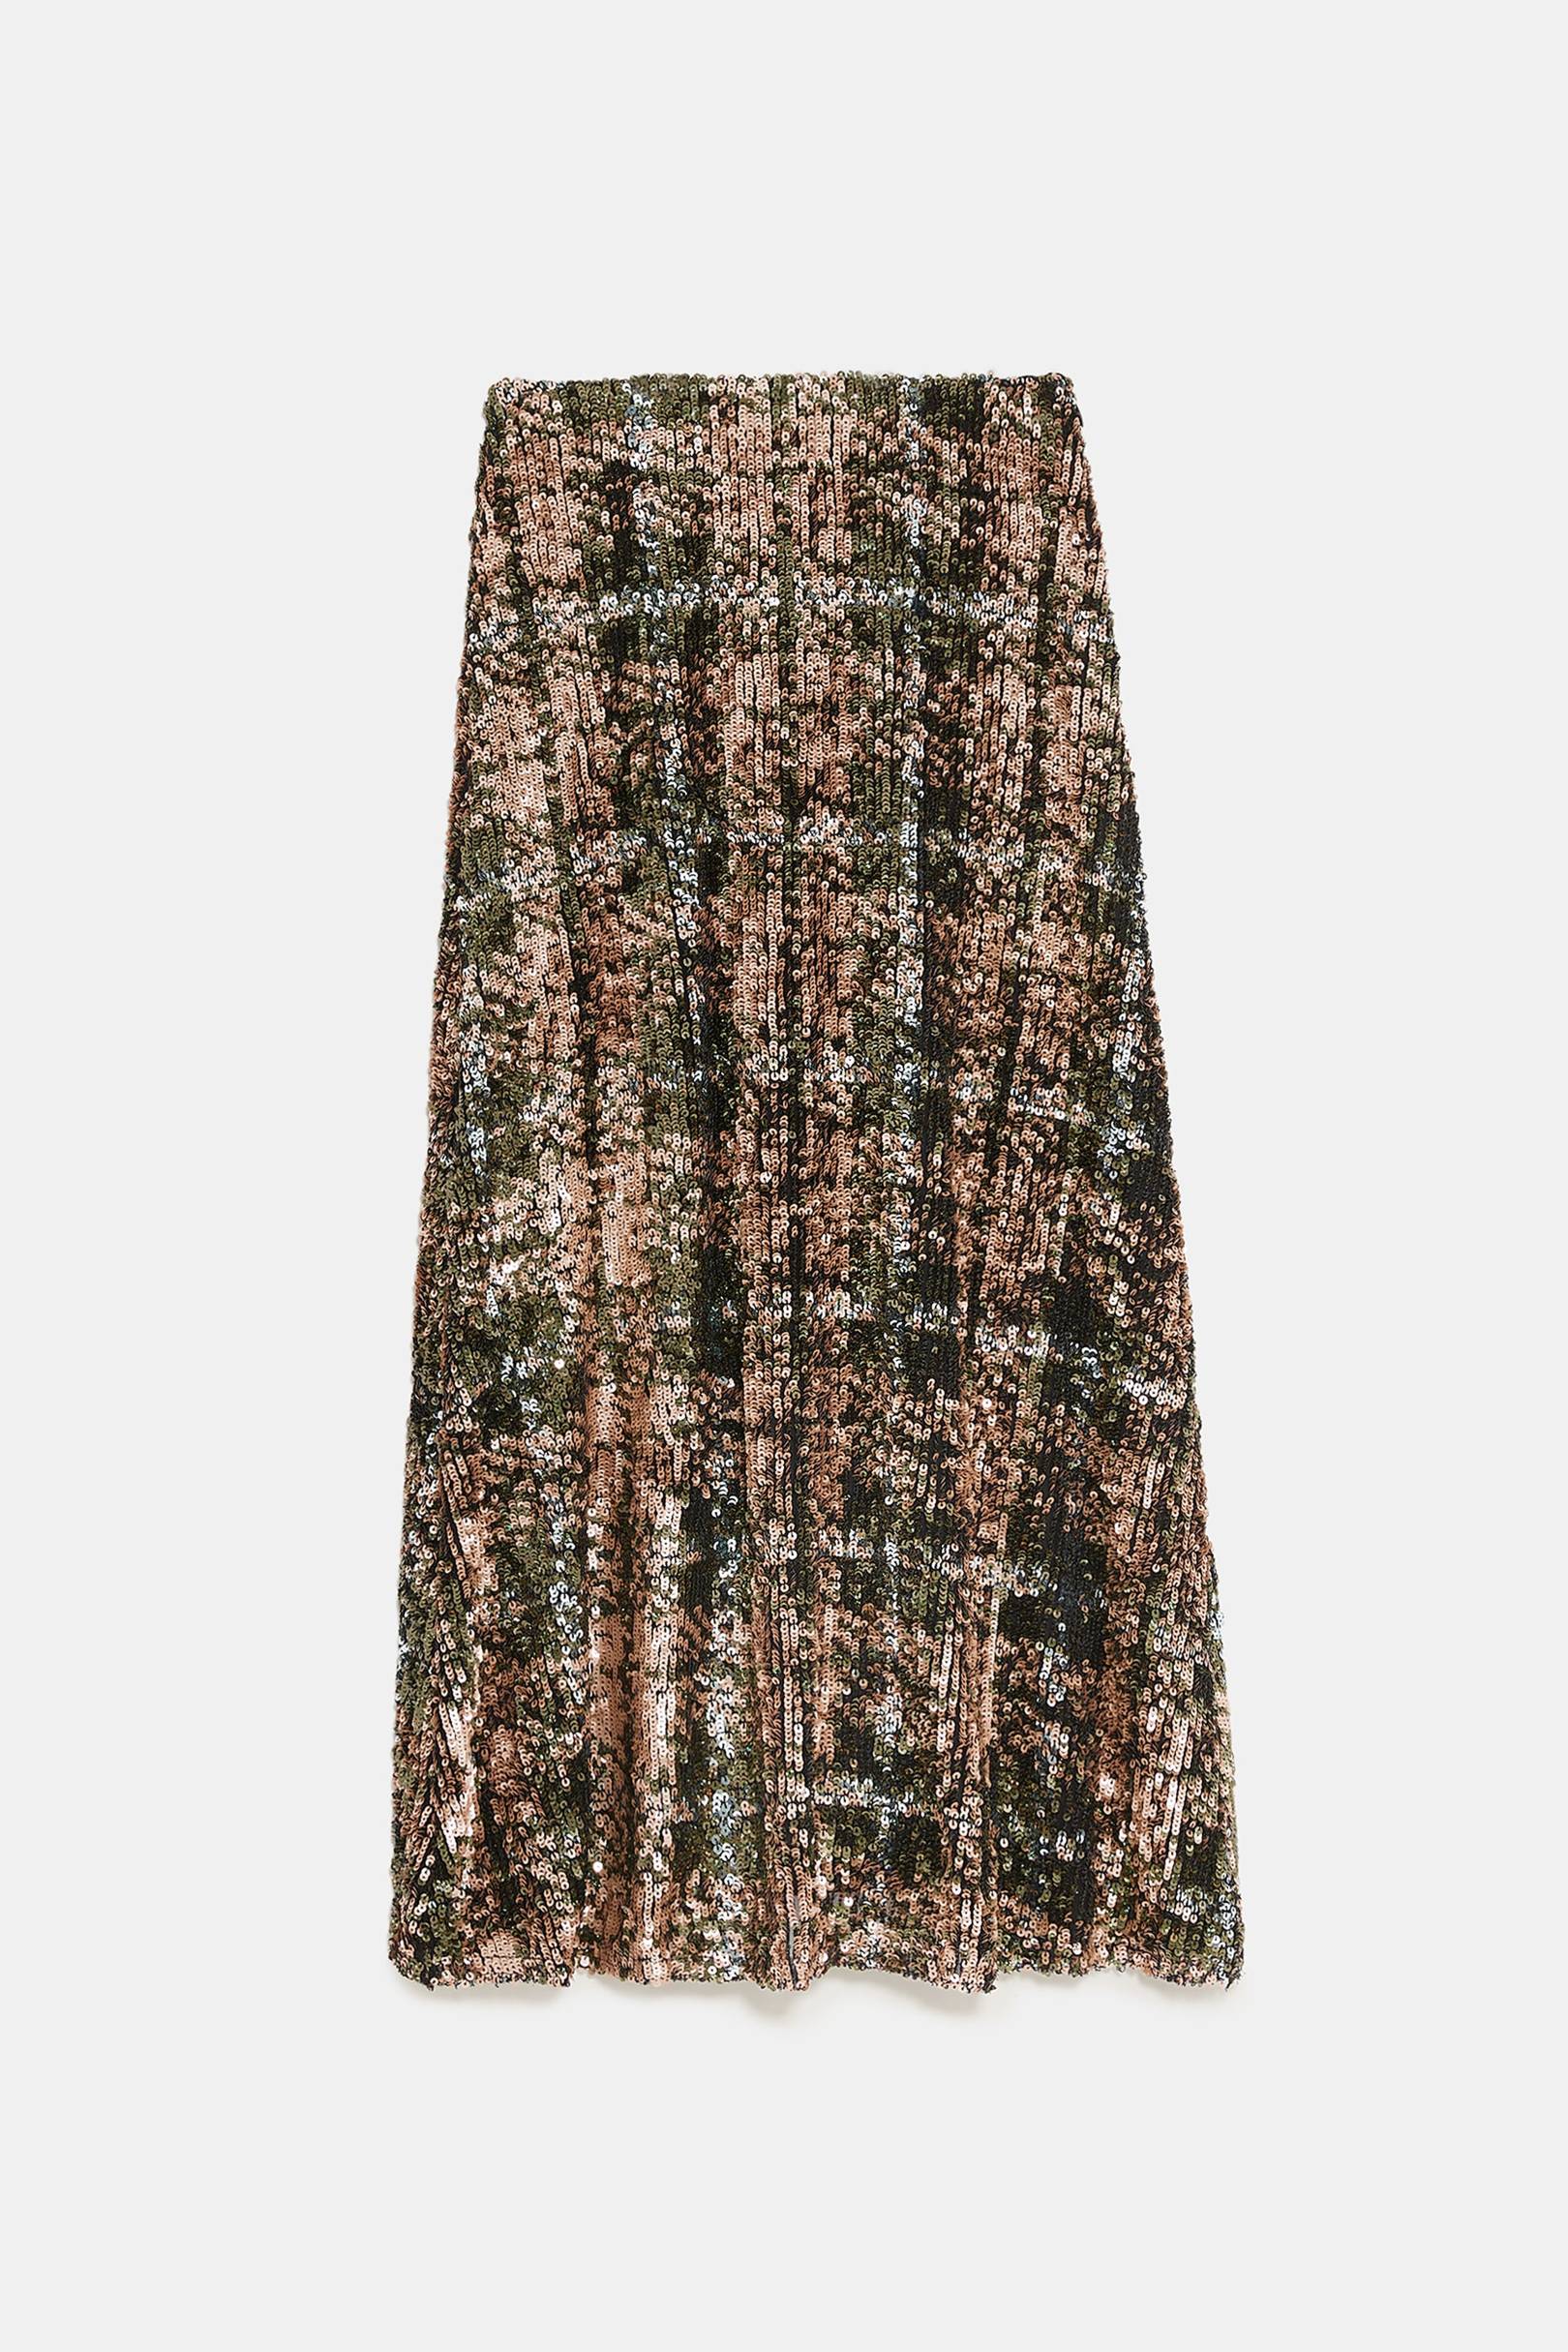 This Zara Sequin Skirt Is Set To Be Your Number 1 Christmas Party Buy ...